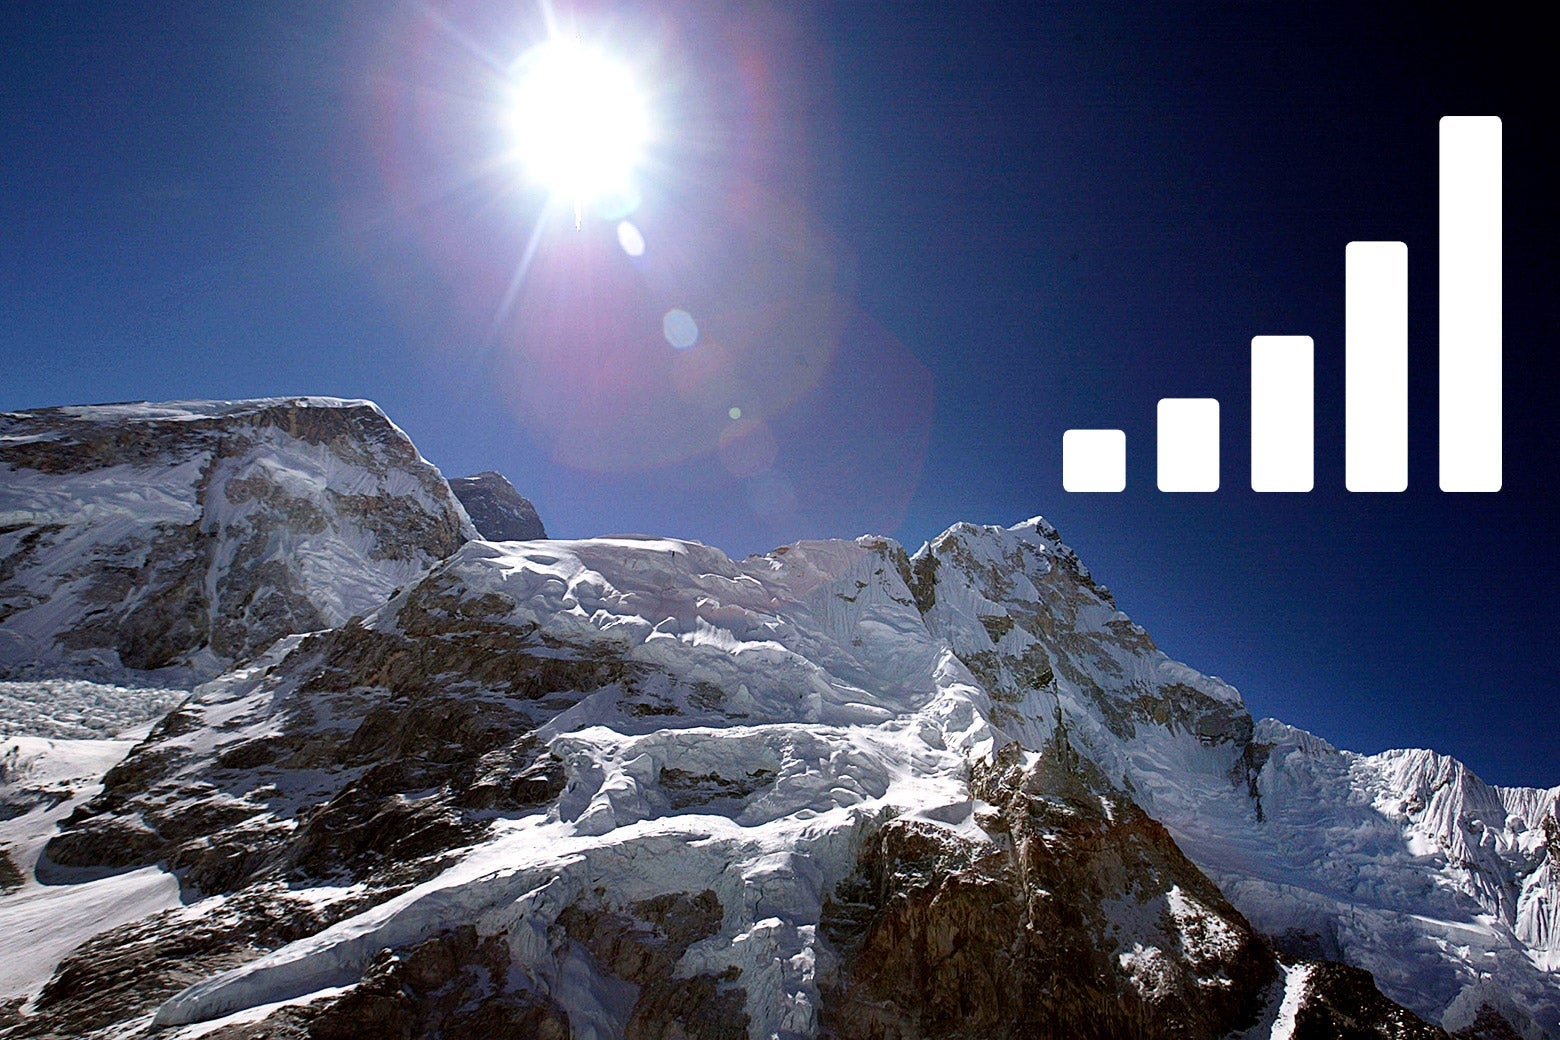 Mount Everest with cellphone reception bars.